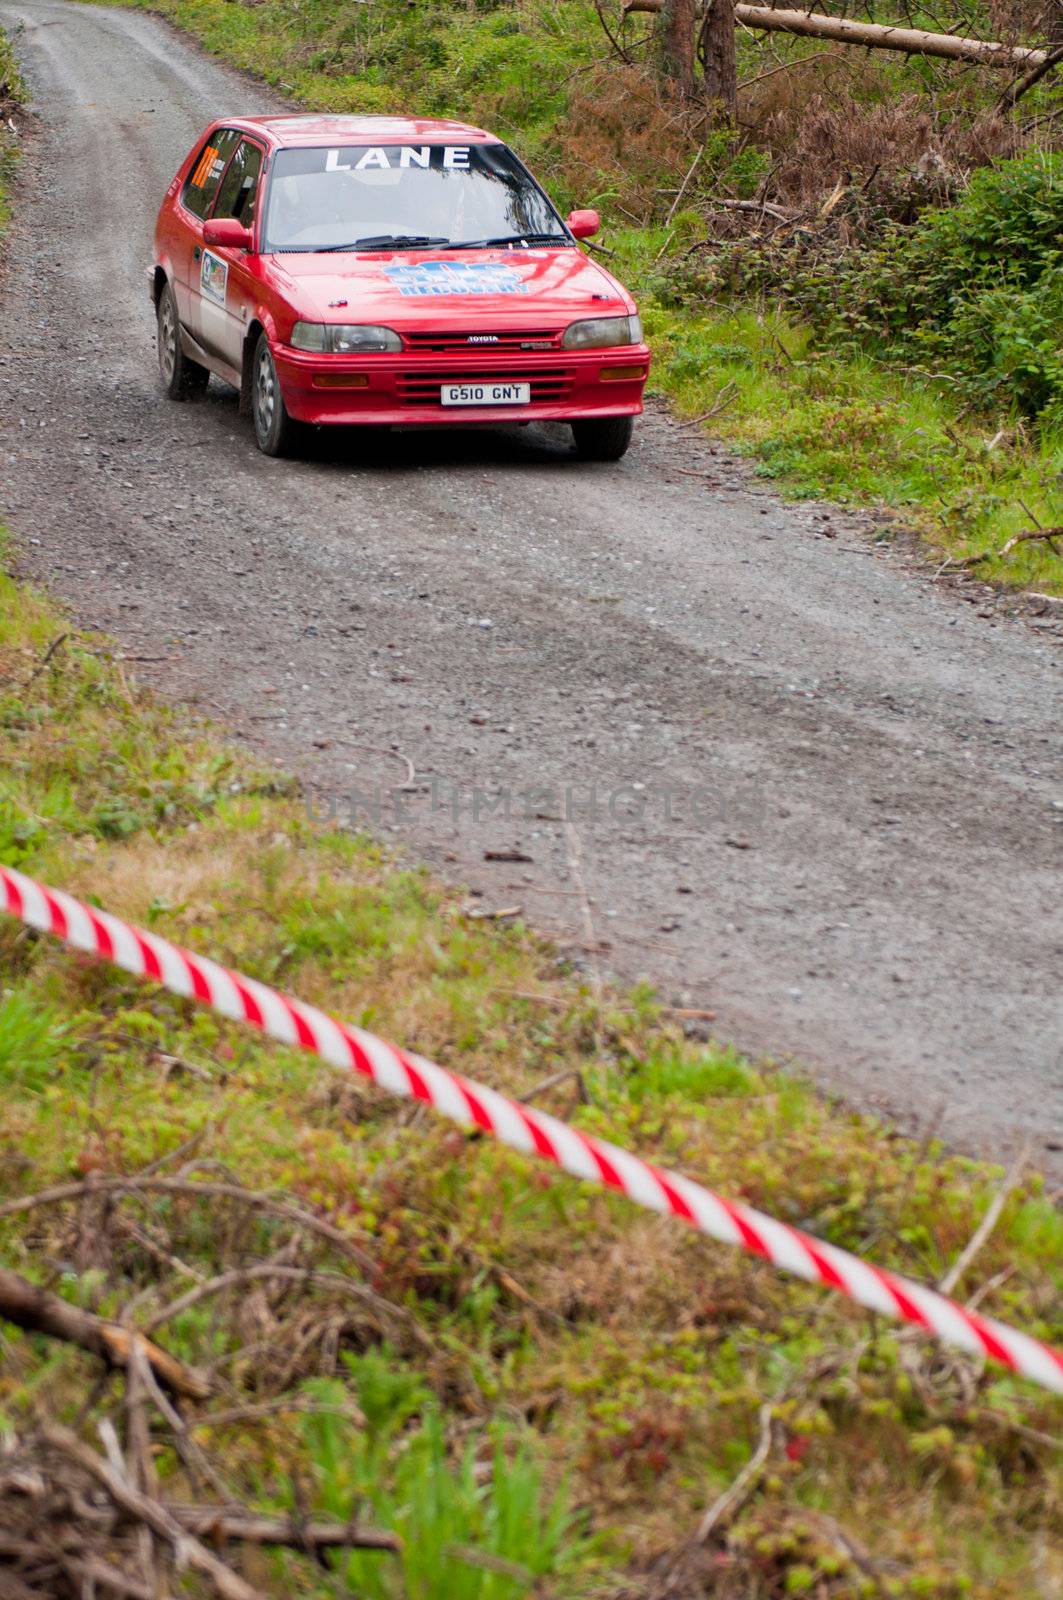 MALLOW, IRELAND - MAY 19: S. Lane driving Toyota Corolla at the Jim Walsh Cork Forest Rally on May 19, 2012 in Mallow, Ireland. 4th round of the Valvoline National Forest Rally Championship.